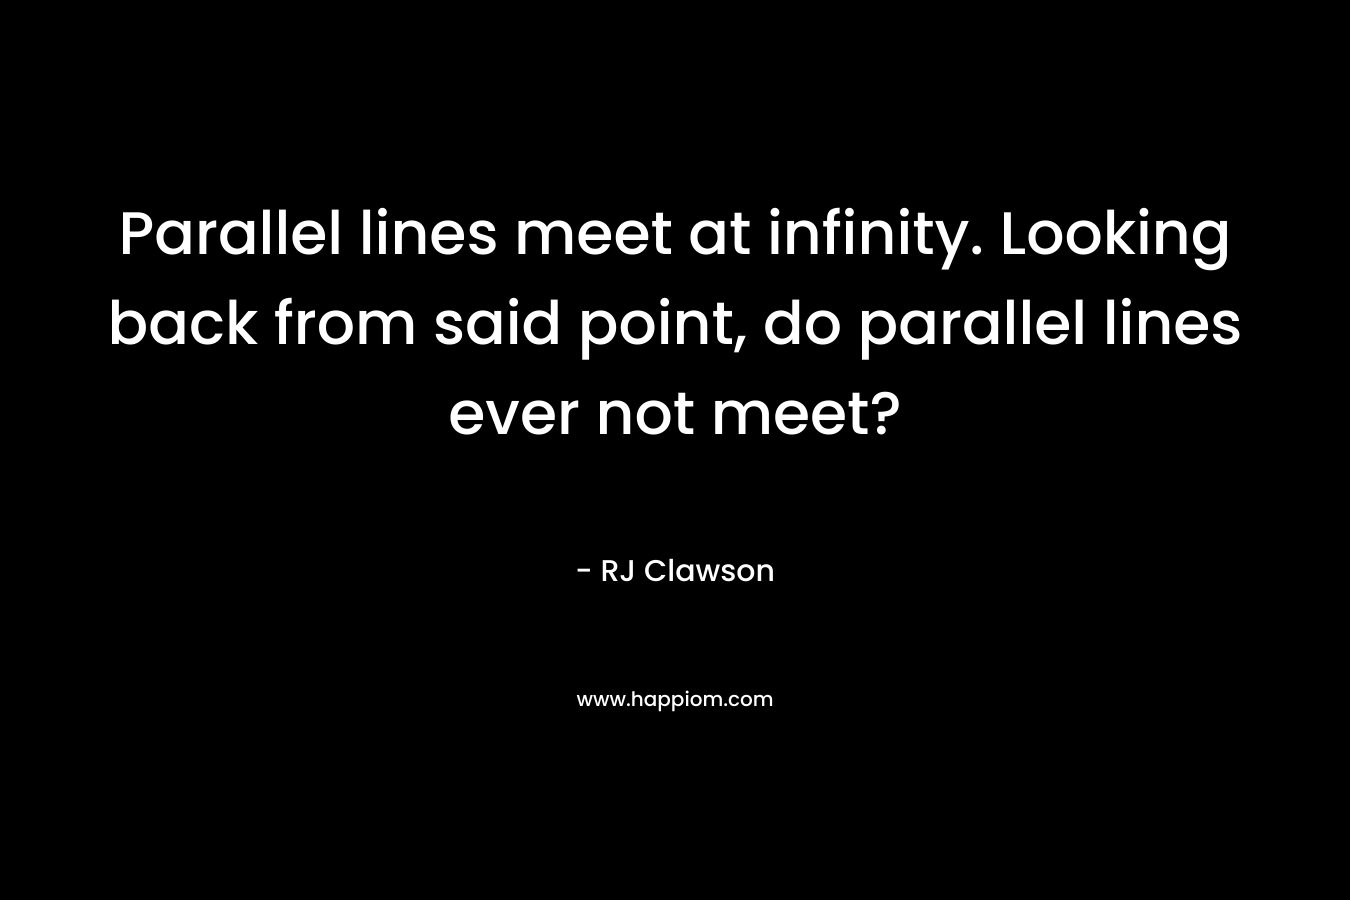 Parallel lines meet at infinity. Looking back from said point, do parallel lines ever not meet? – RJ Clawson